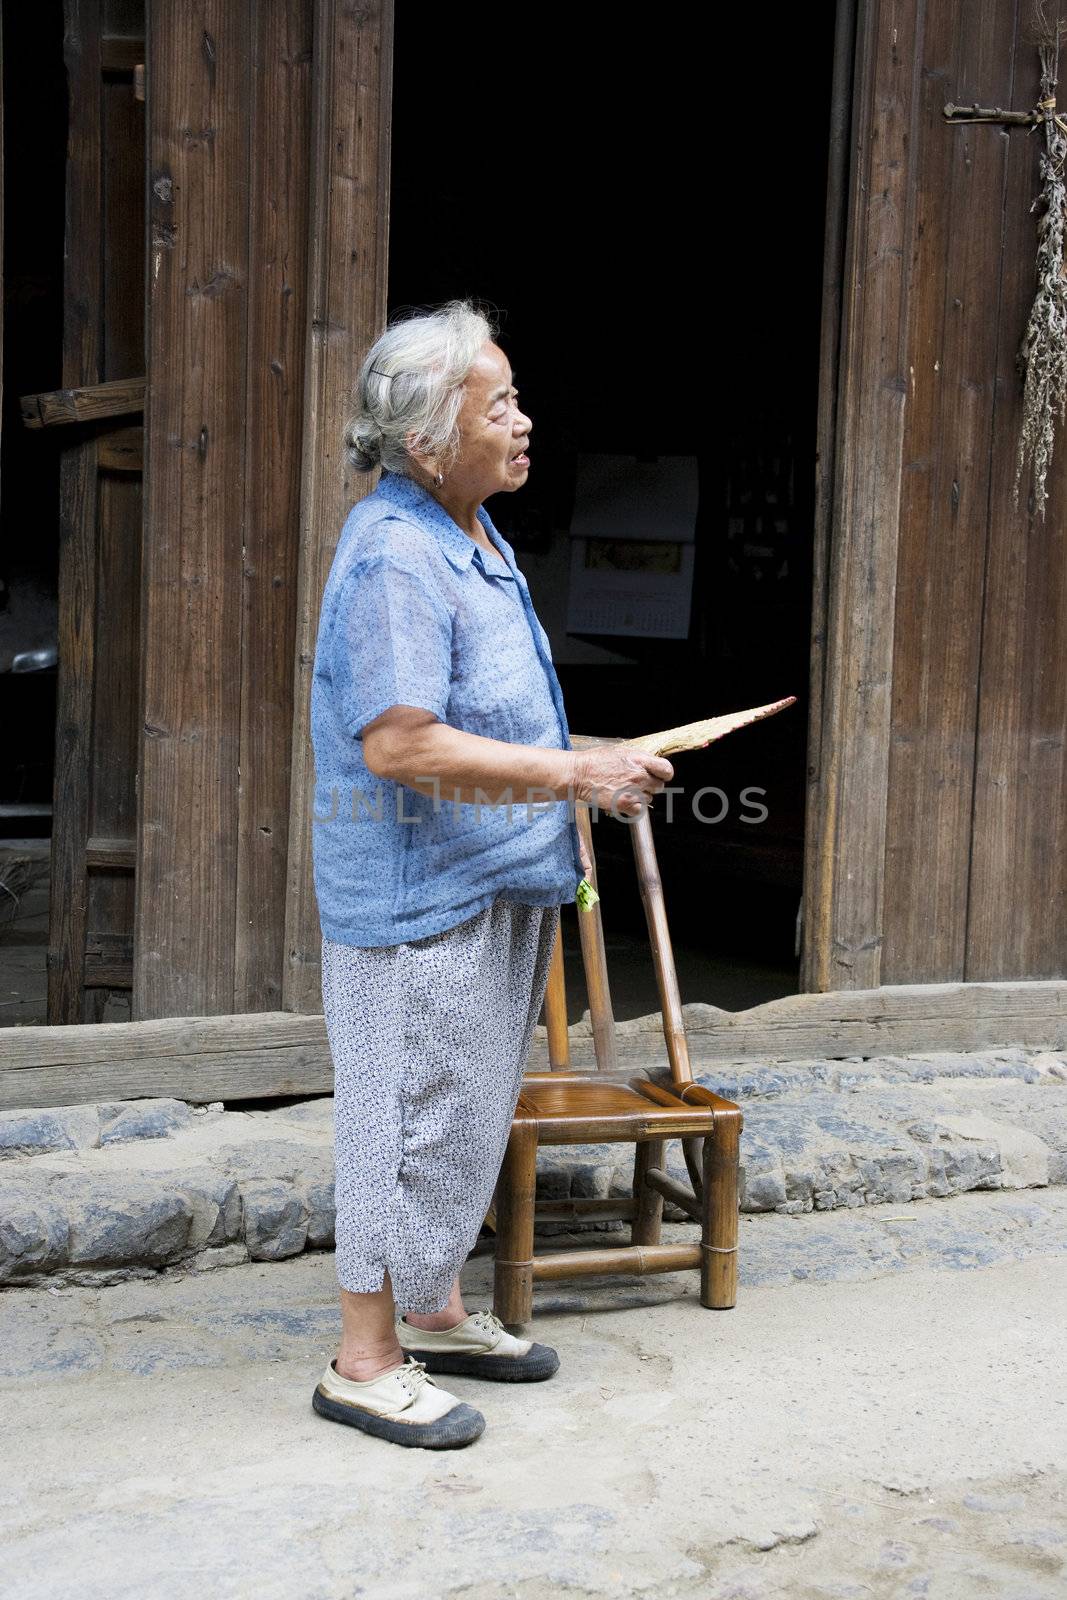 Image of an elderly Chinese lady at Daxu Ancient Town, Guilin, China.